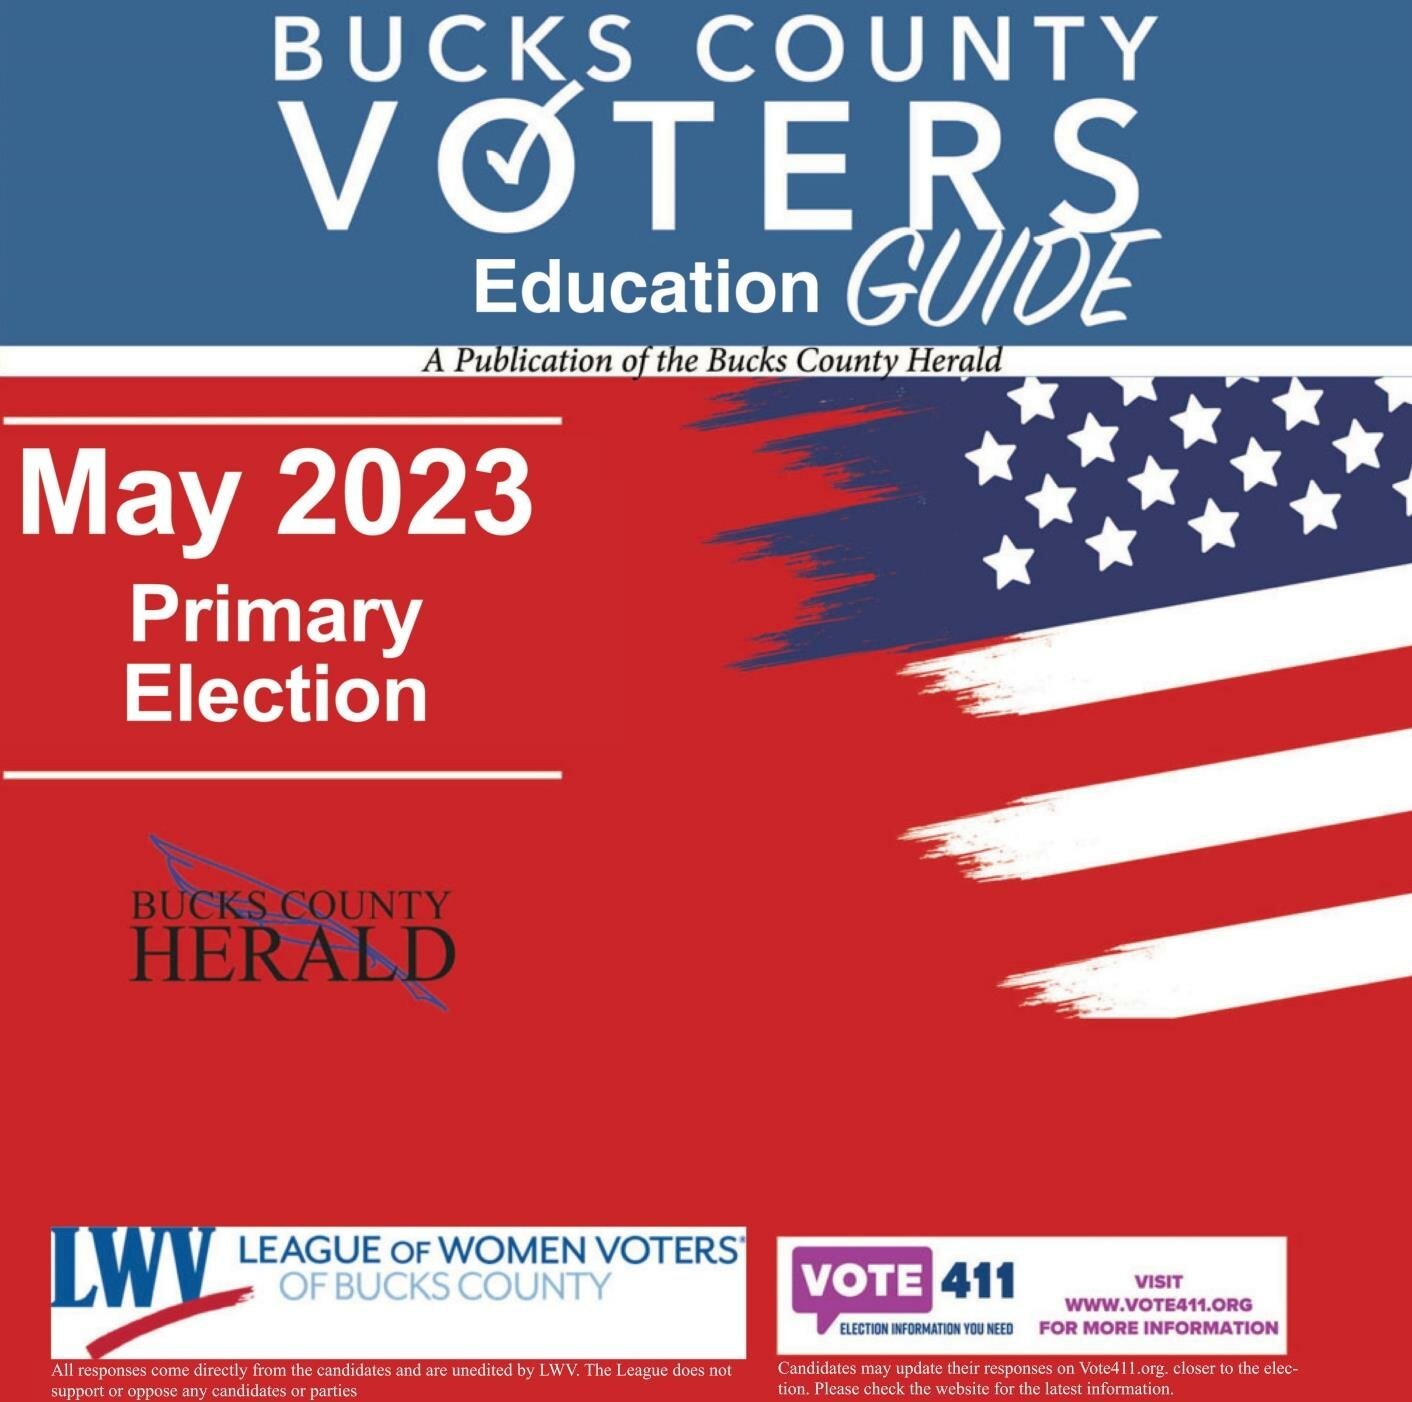 Bucks County Voters Education Guide: May 2023 Primary Election cover